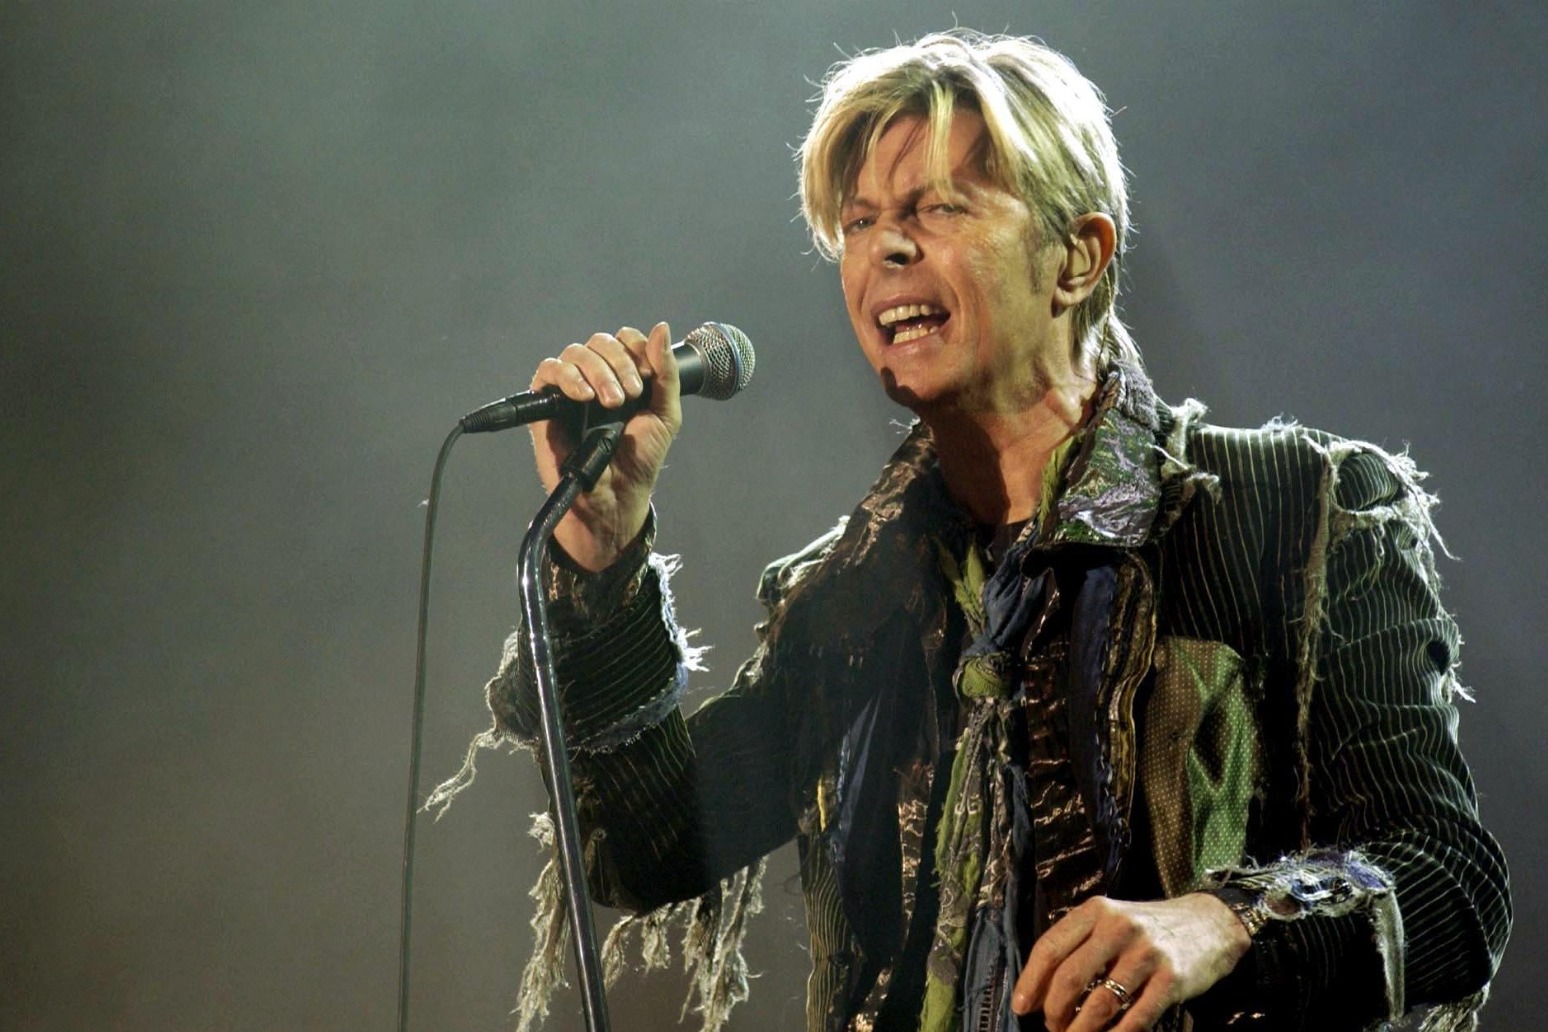 Feature-length documentary about the life of David Bowie slated for 2023 